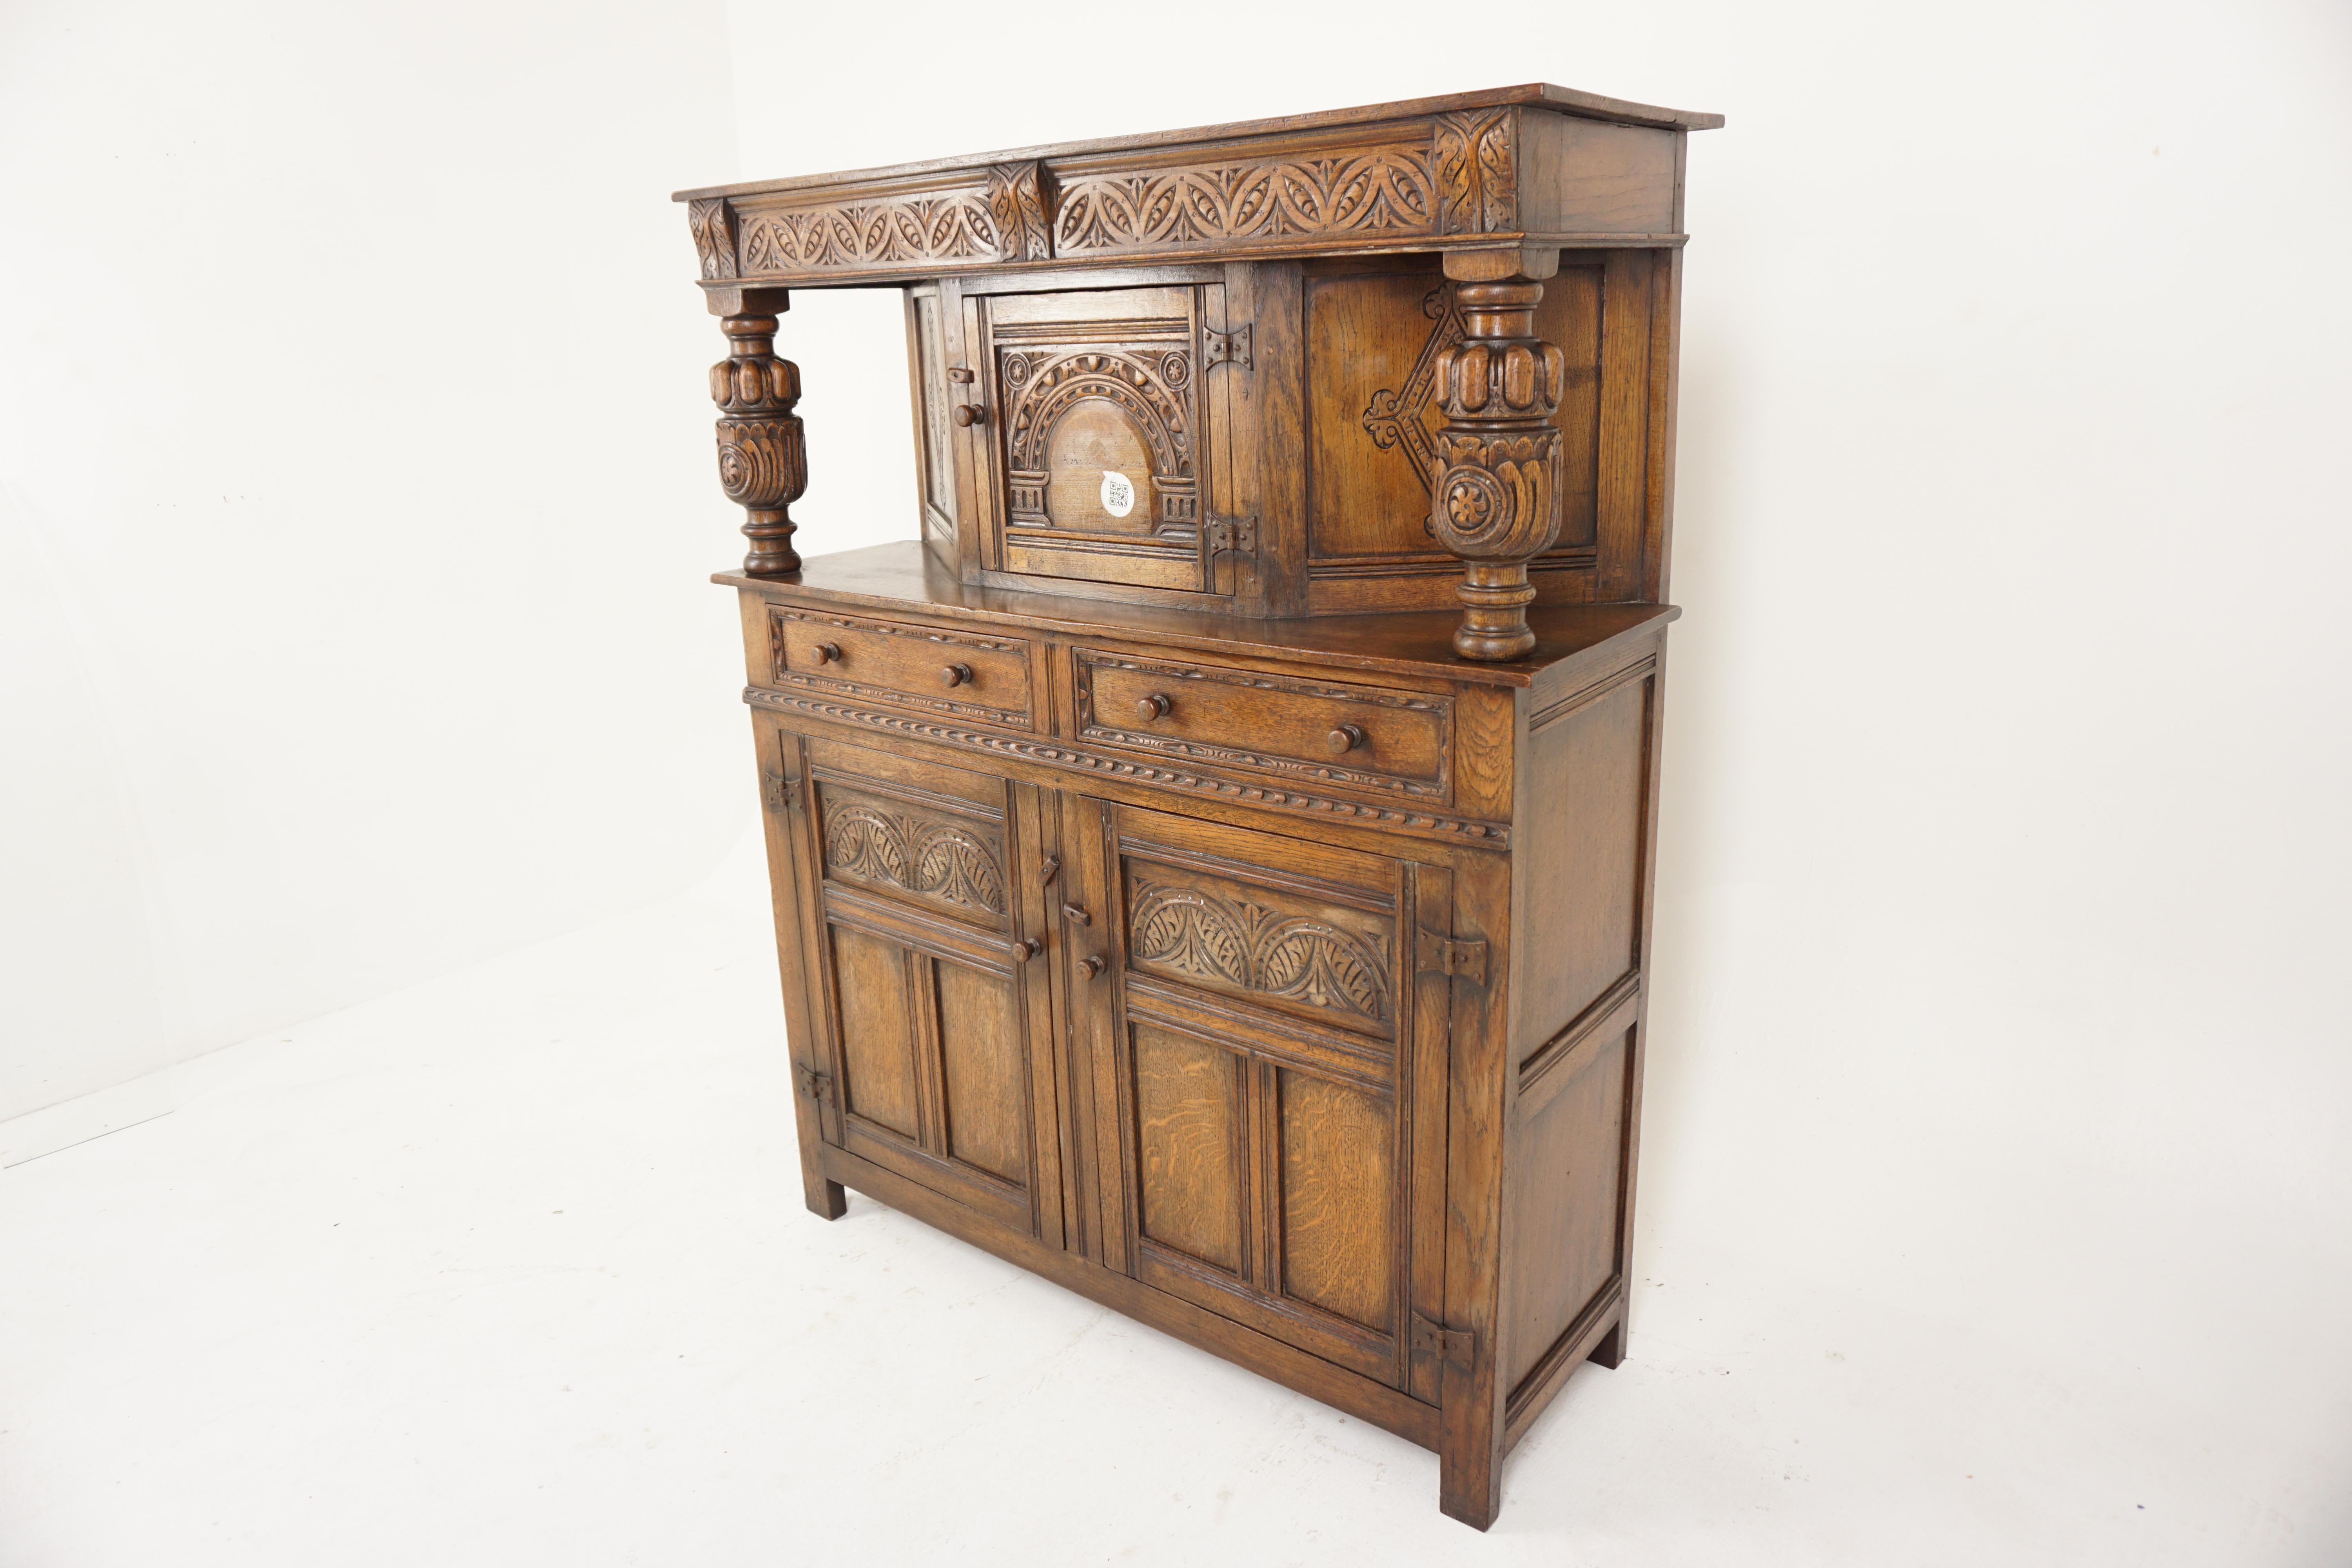 Antique Carved Oak Court Cupboard, Sideboard Buffet and Hutch, Scotland 1920, H727

Scotland 1920
Solid Oak
Original Finish
Rectangular top with carved frieze
With shaped cupboard under
Cupboard door to the center with carved panels to the